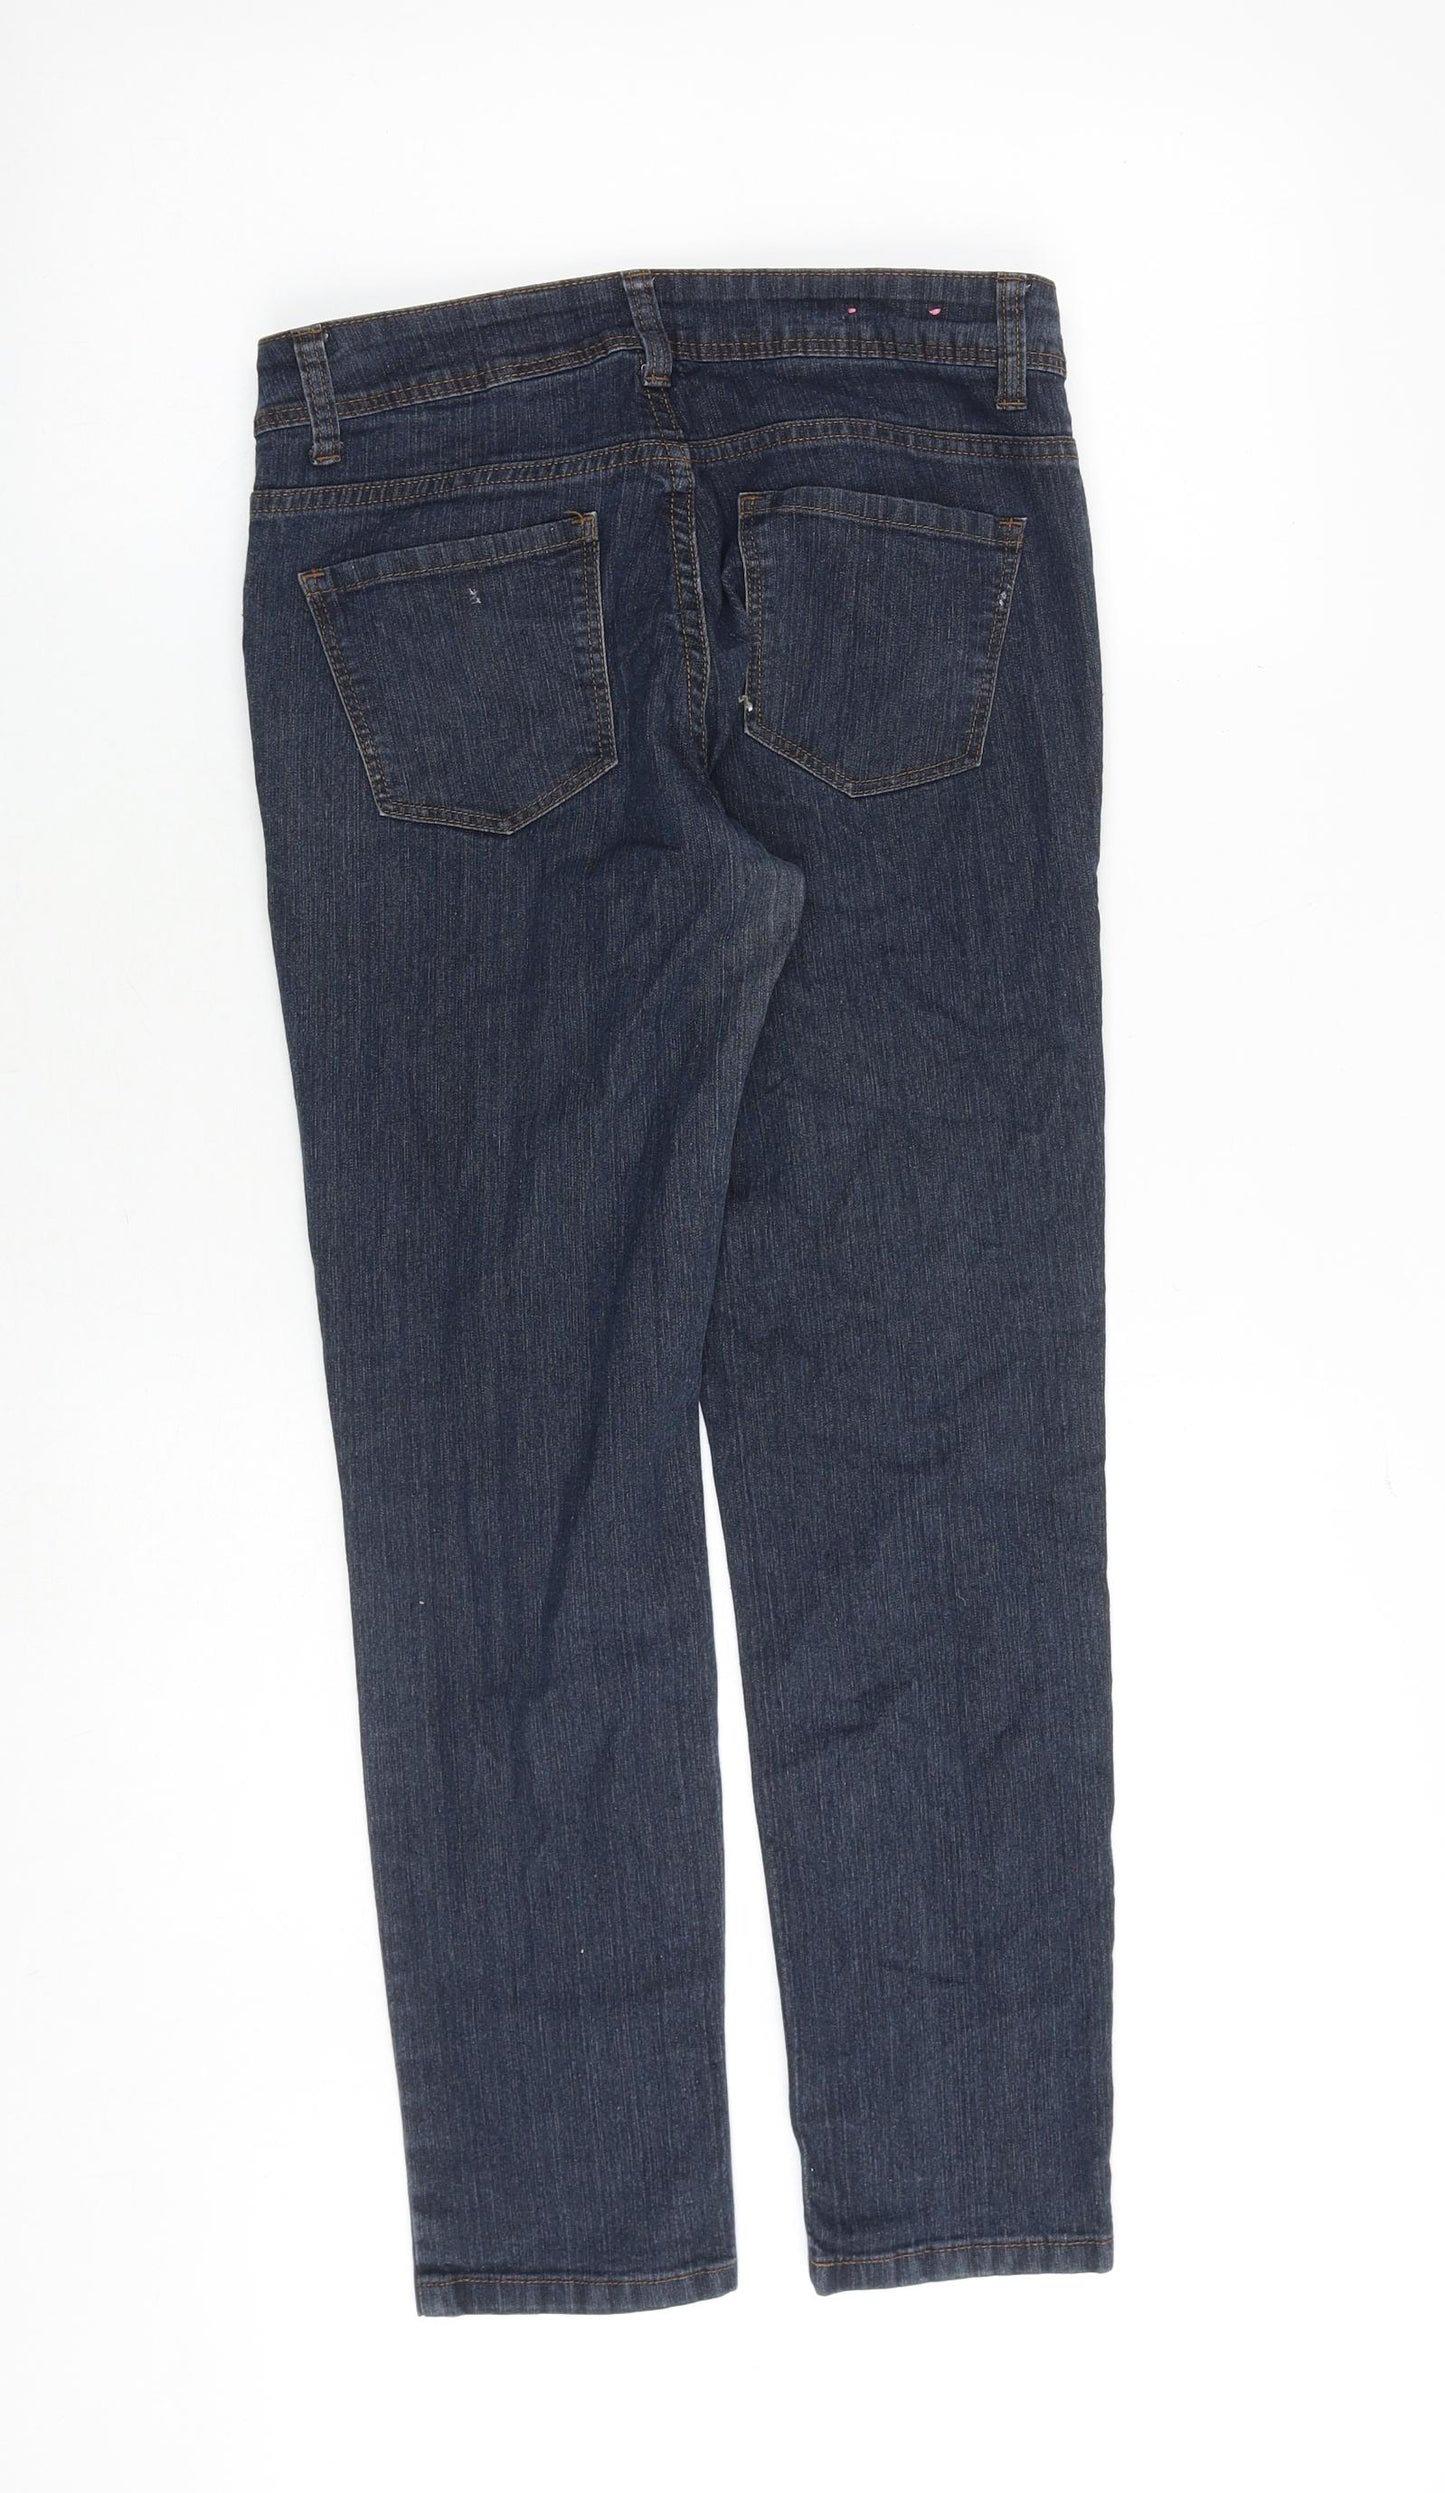 YESYES Womens Blue Cotton Tapered Jeans Size 10 Regular Zip